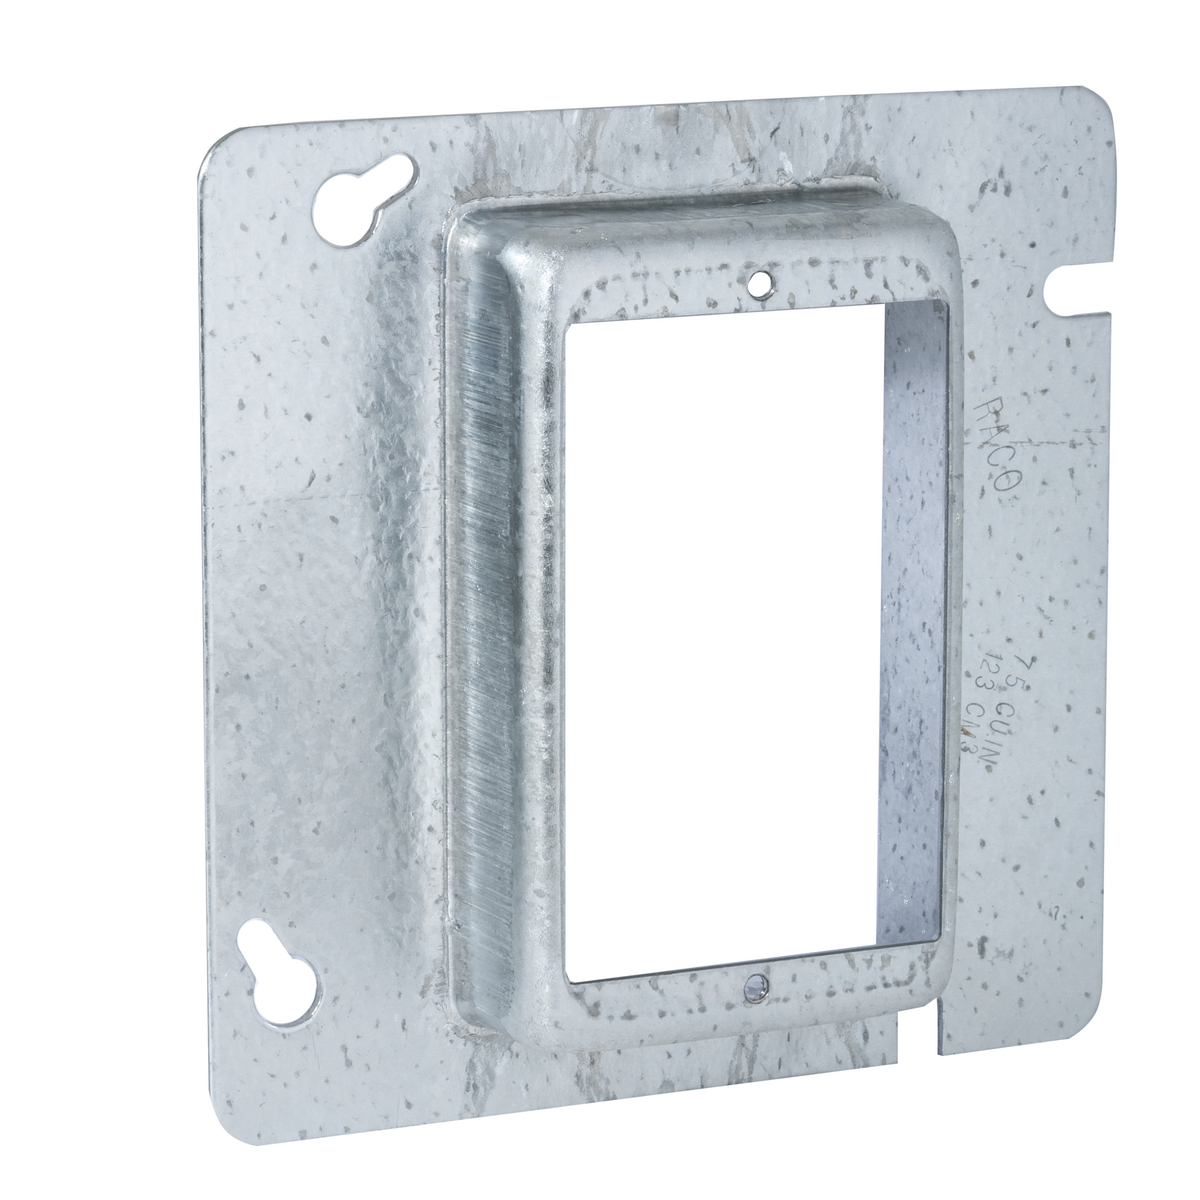 RACO 839 4-11/16" SQUARE 1D 1G SWITCH RING